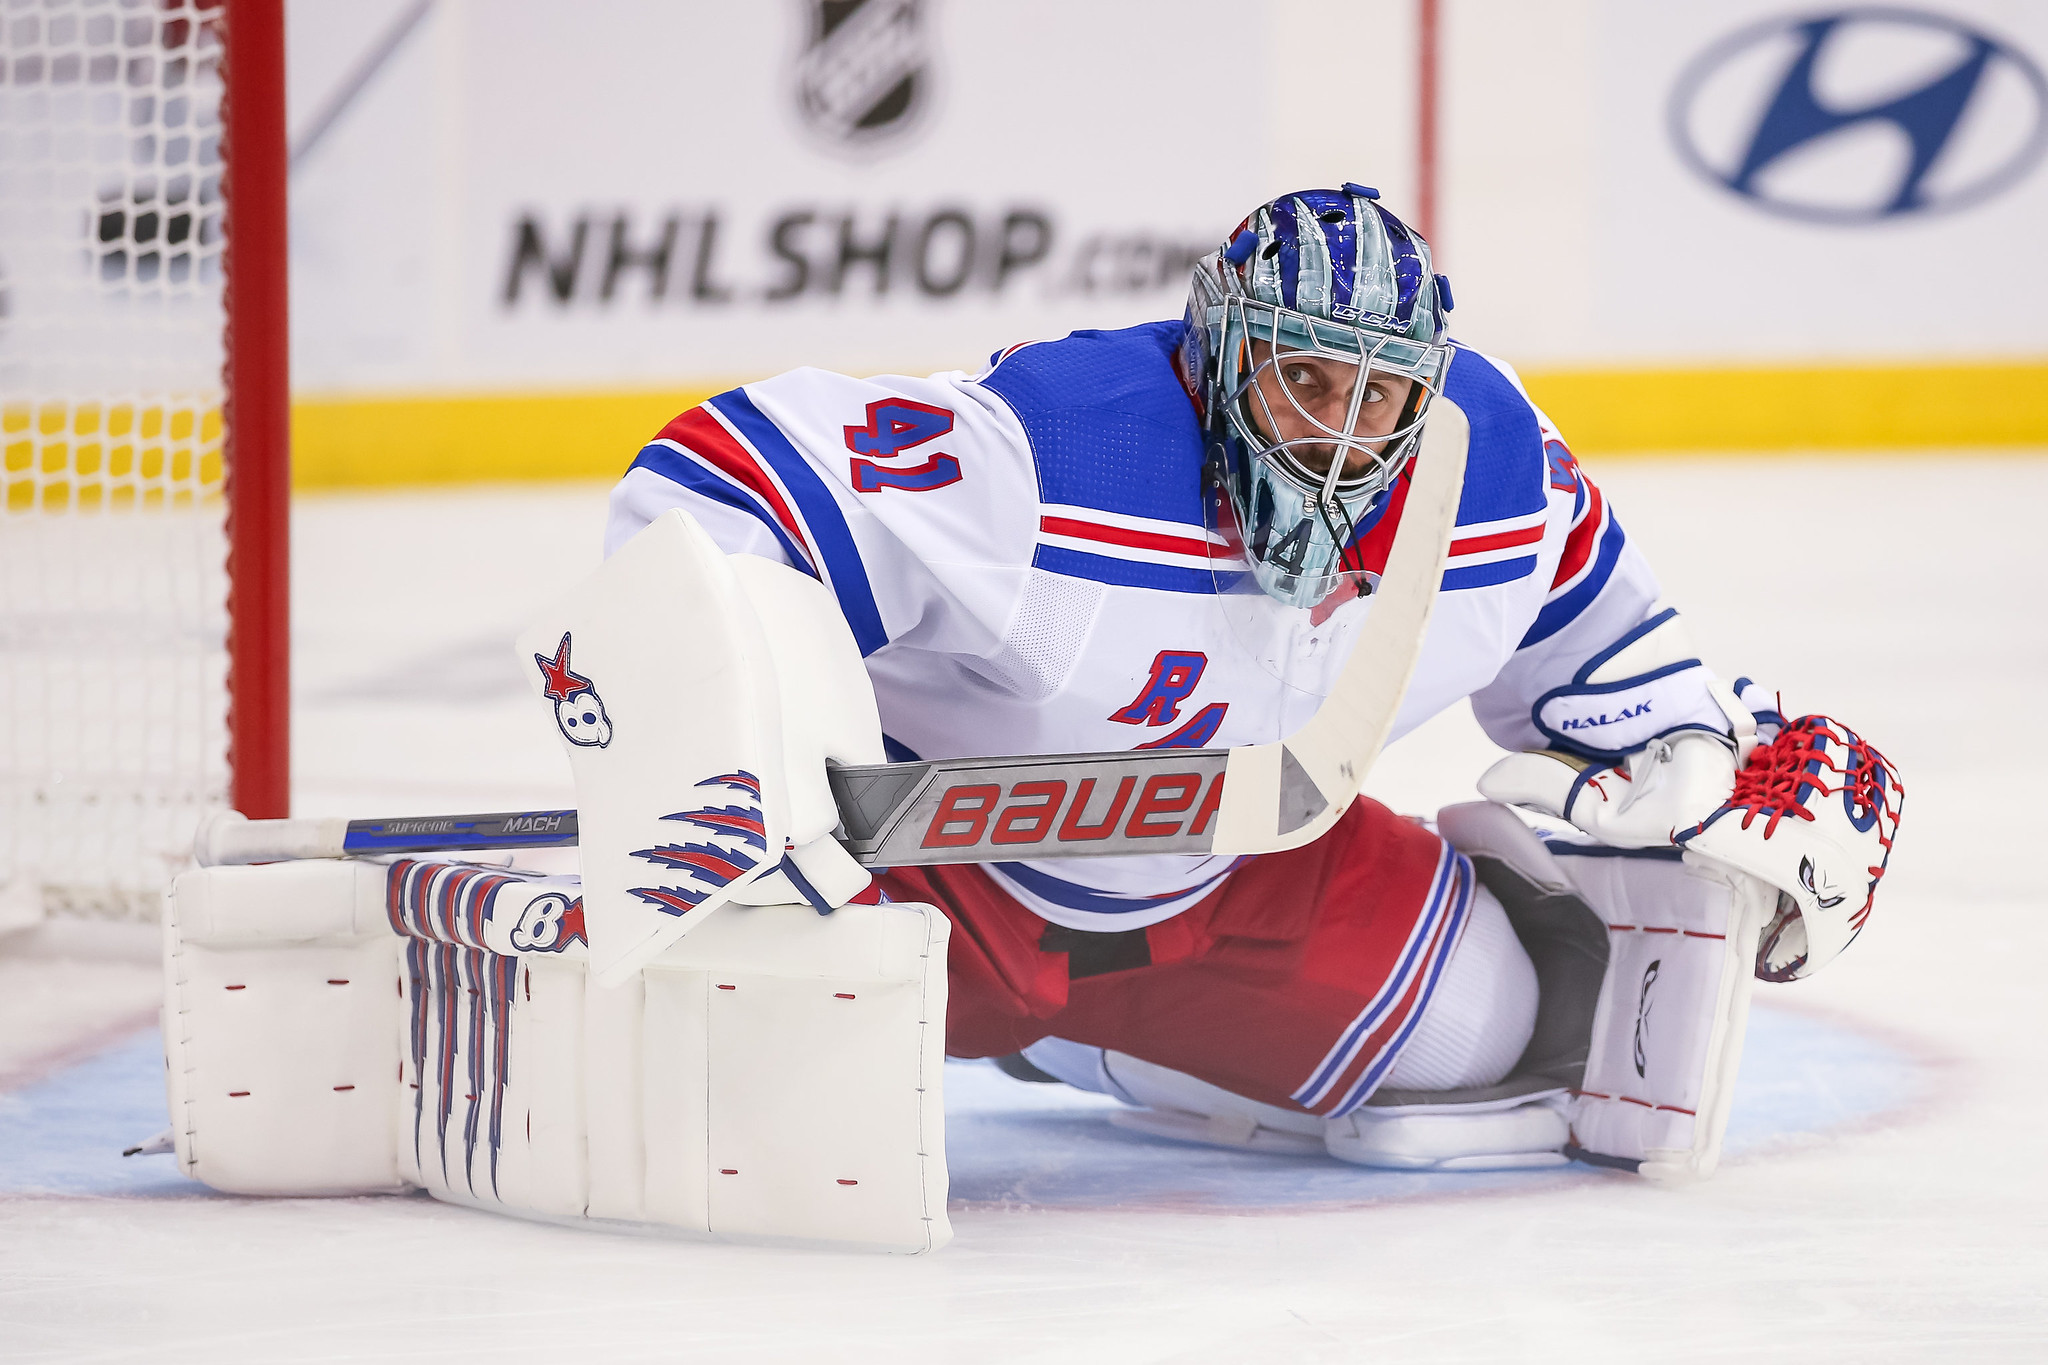 Halak to test free agency, Jonathan Quick an option for Rangers